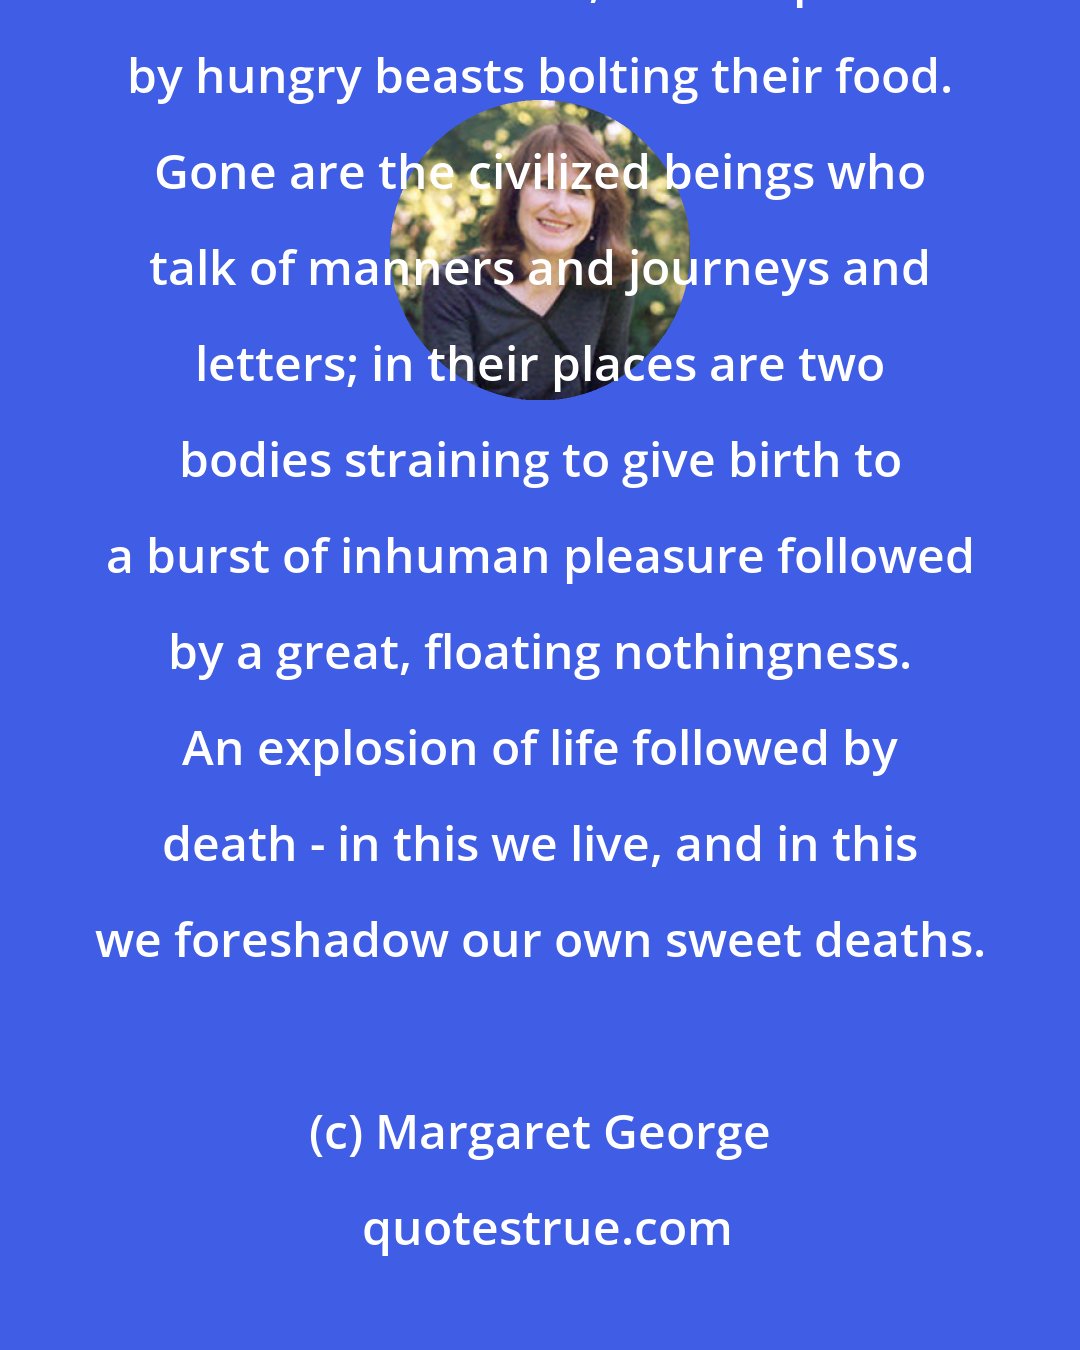 Margaret George: Now I felt the long-forgotten urgency of lovemaking, when it seems one's human selves leave, to be replaced by hungry beasts bolting their food. Gone are the civilized beings who talk of manners and journeys and letters; in their places are two bodies straining to give birth to a burst of inhuman pleasure followed by a great, floating nothingness. An explosion of life followed by death - in this we live, and in this we foreshadow our own sweet deaths.